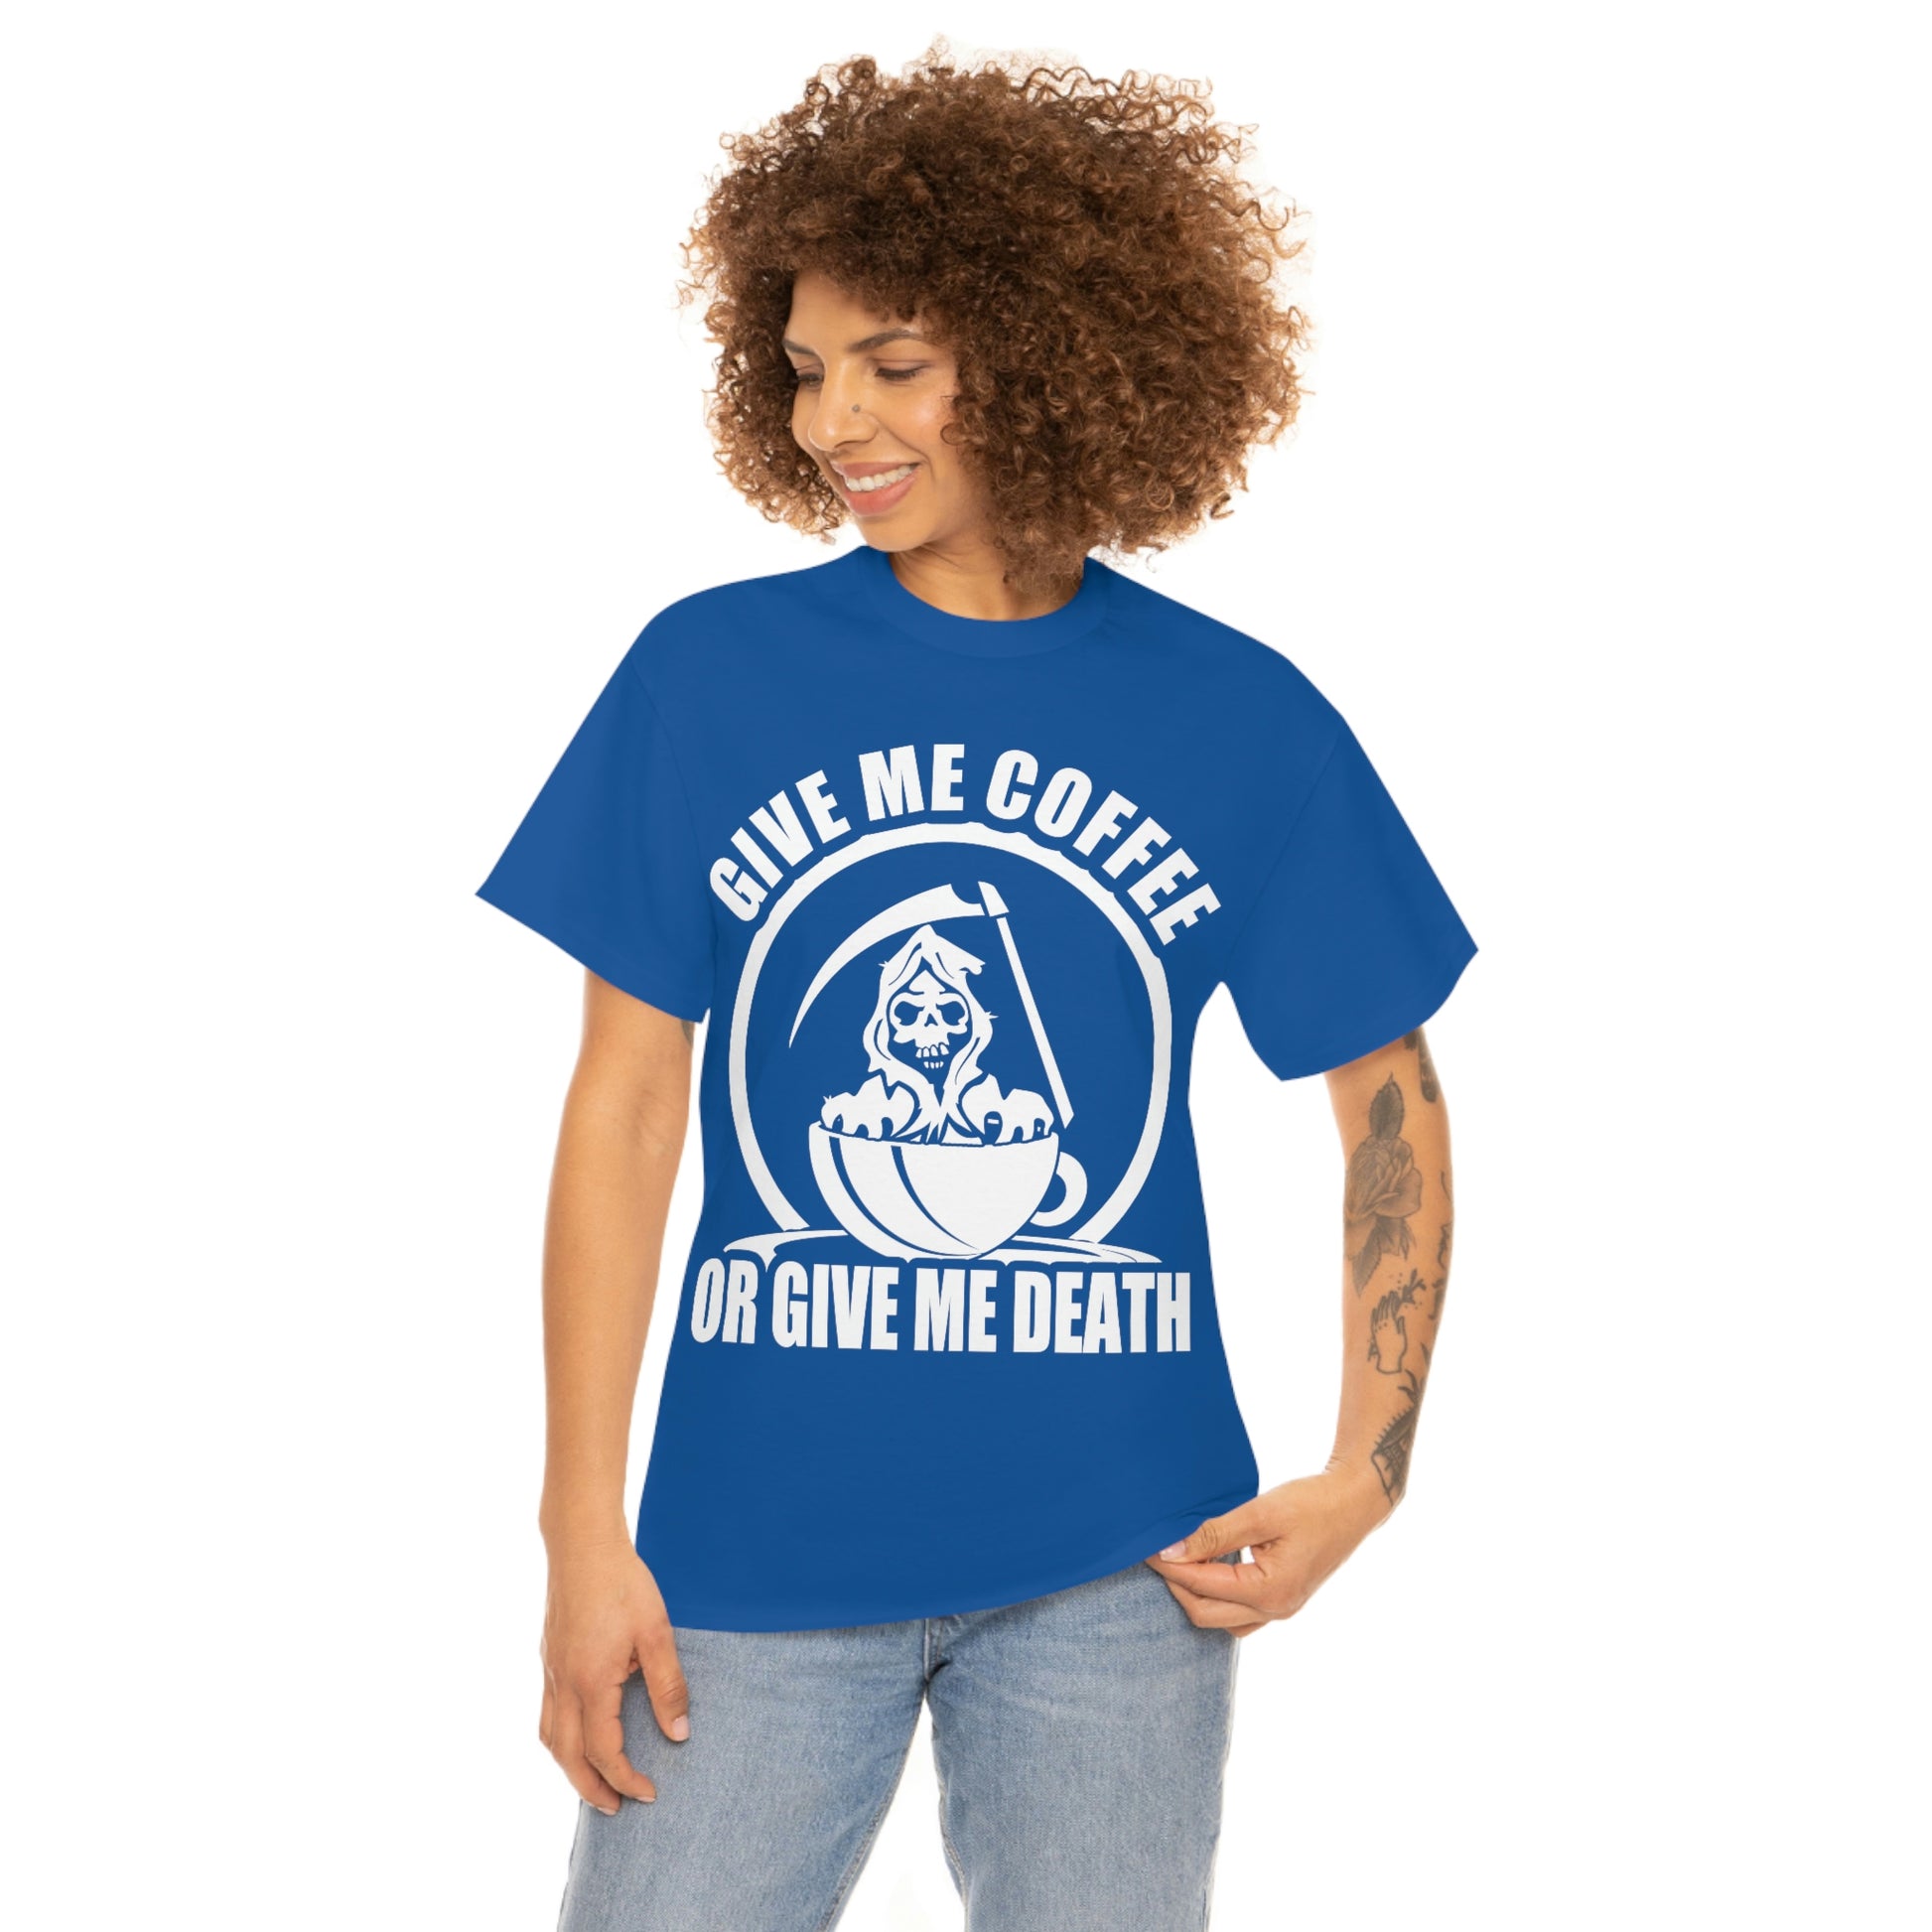 Give Me Coffee Or Give Me Death Shirt